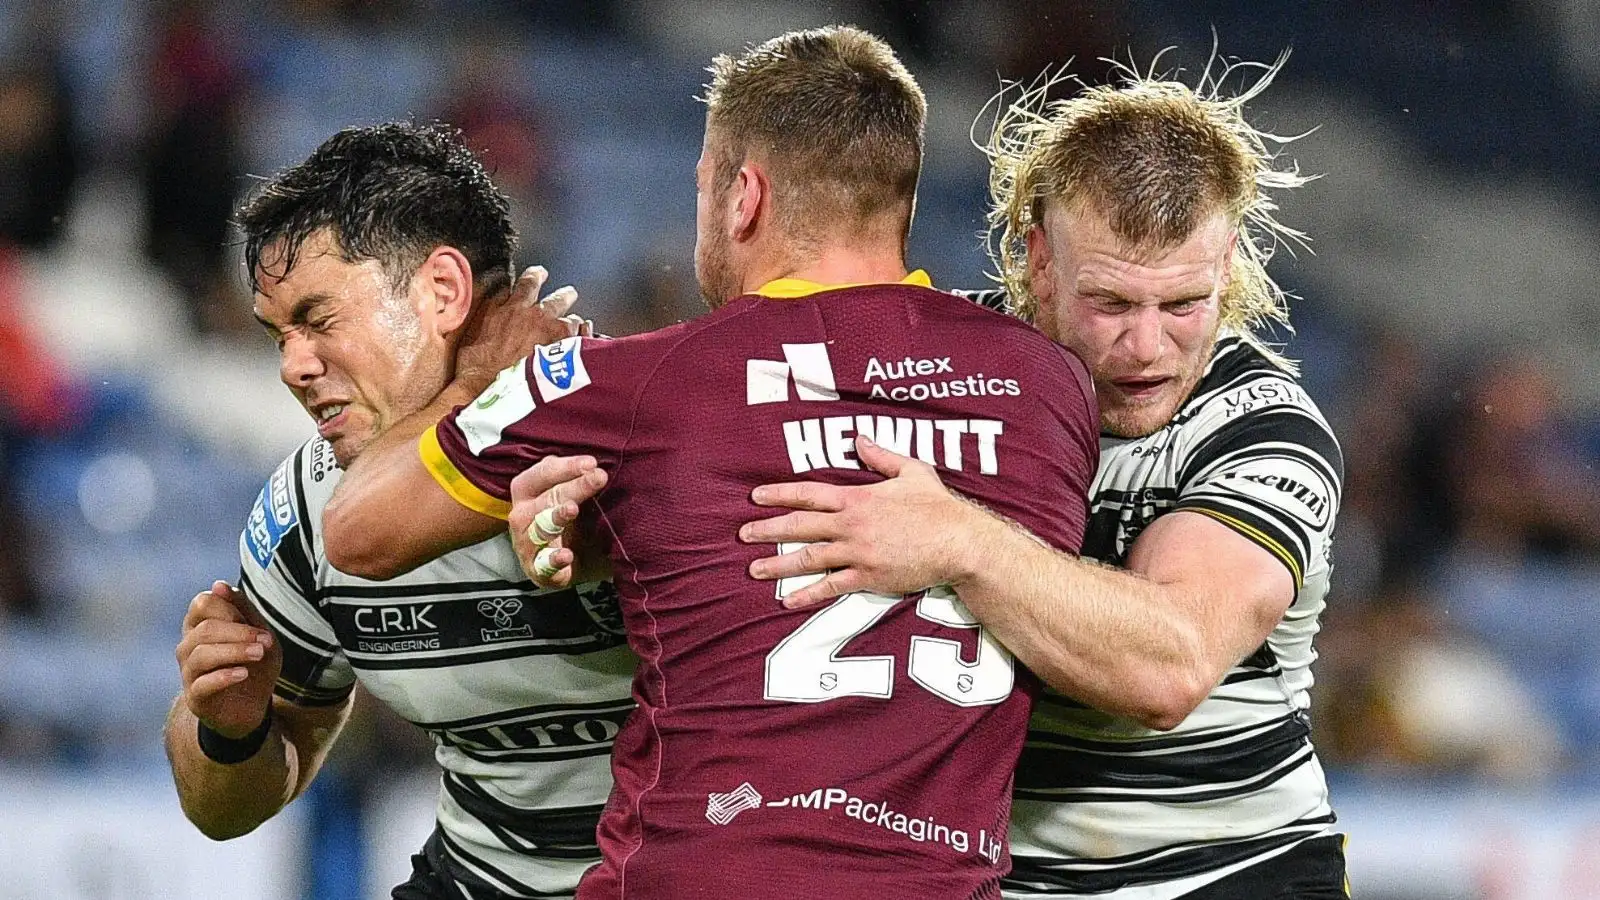 Andre Savelio and Hull FC team-mate Brad Fash tackle Huddersfield's Sam Hewitt. Picture by Dean Williams / Alamy Stock Photo.